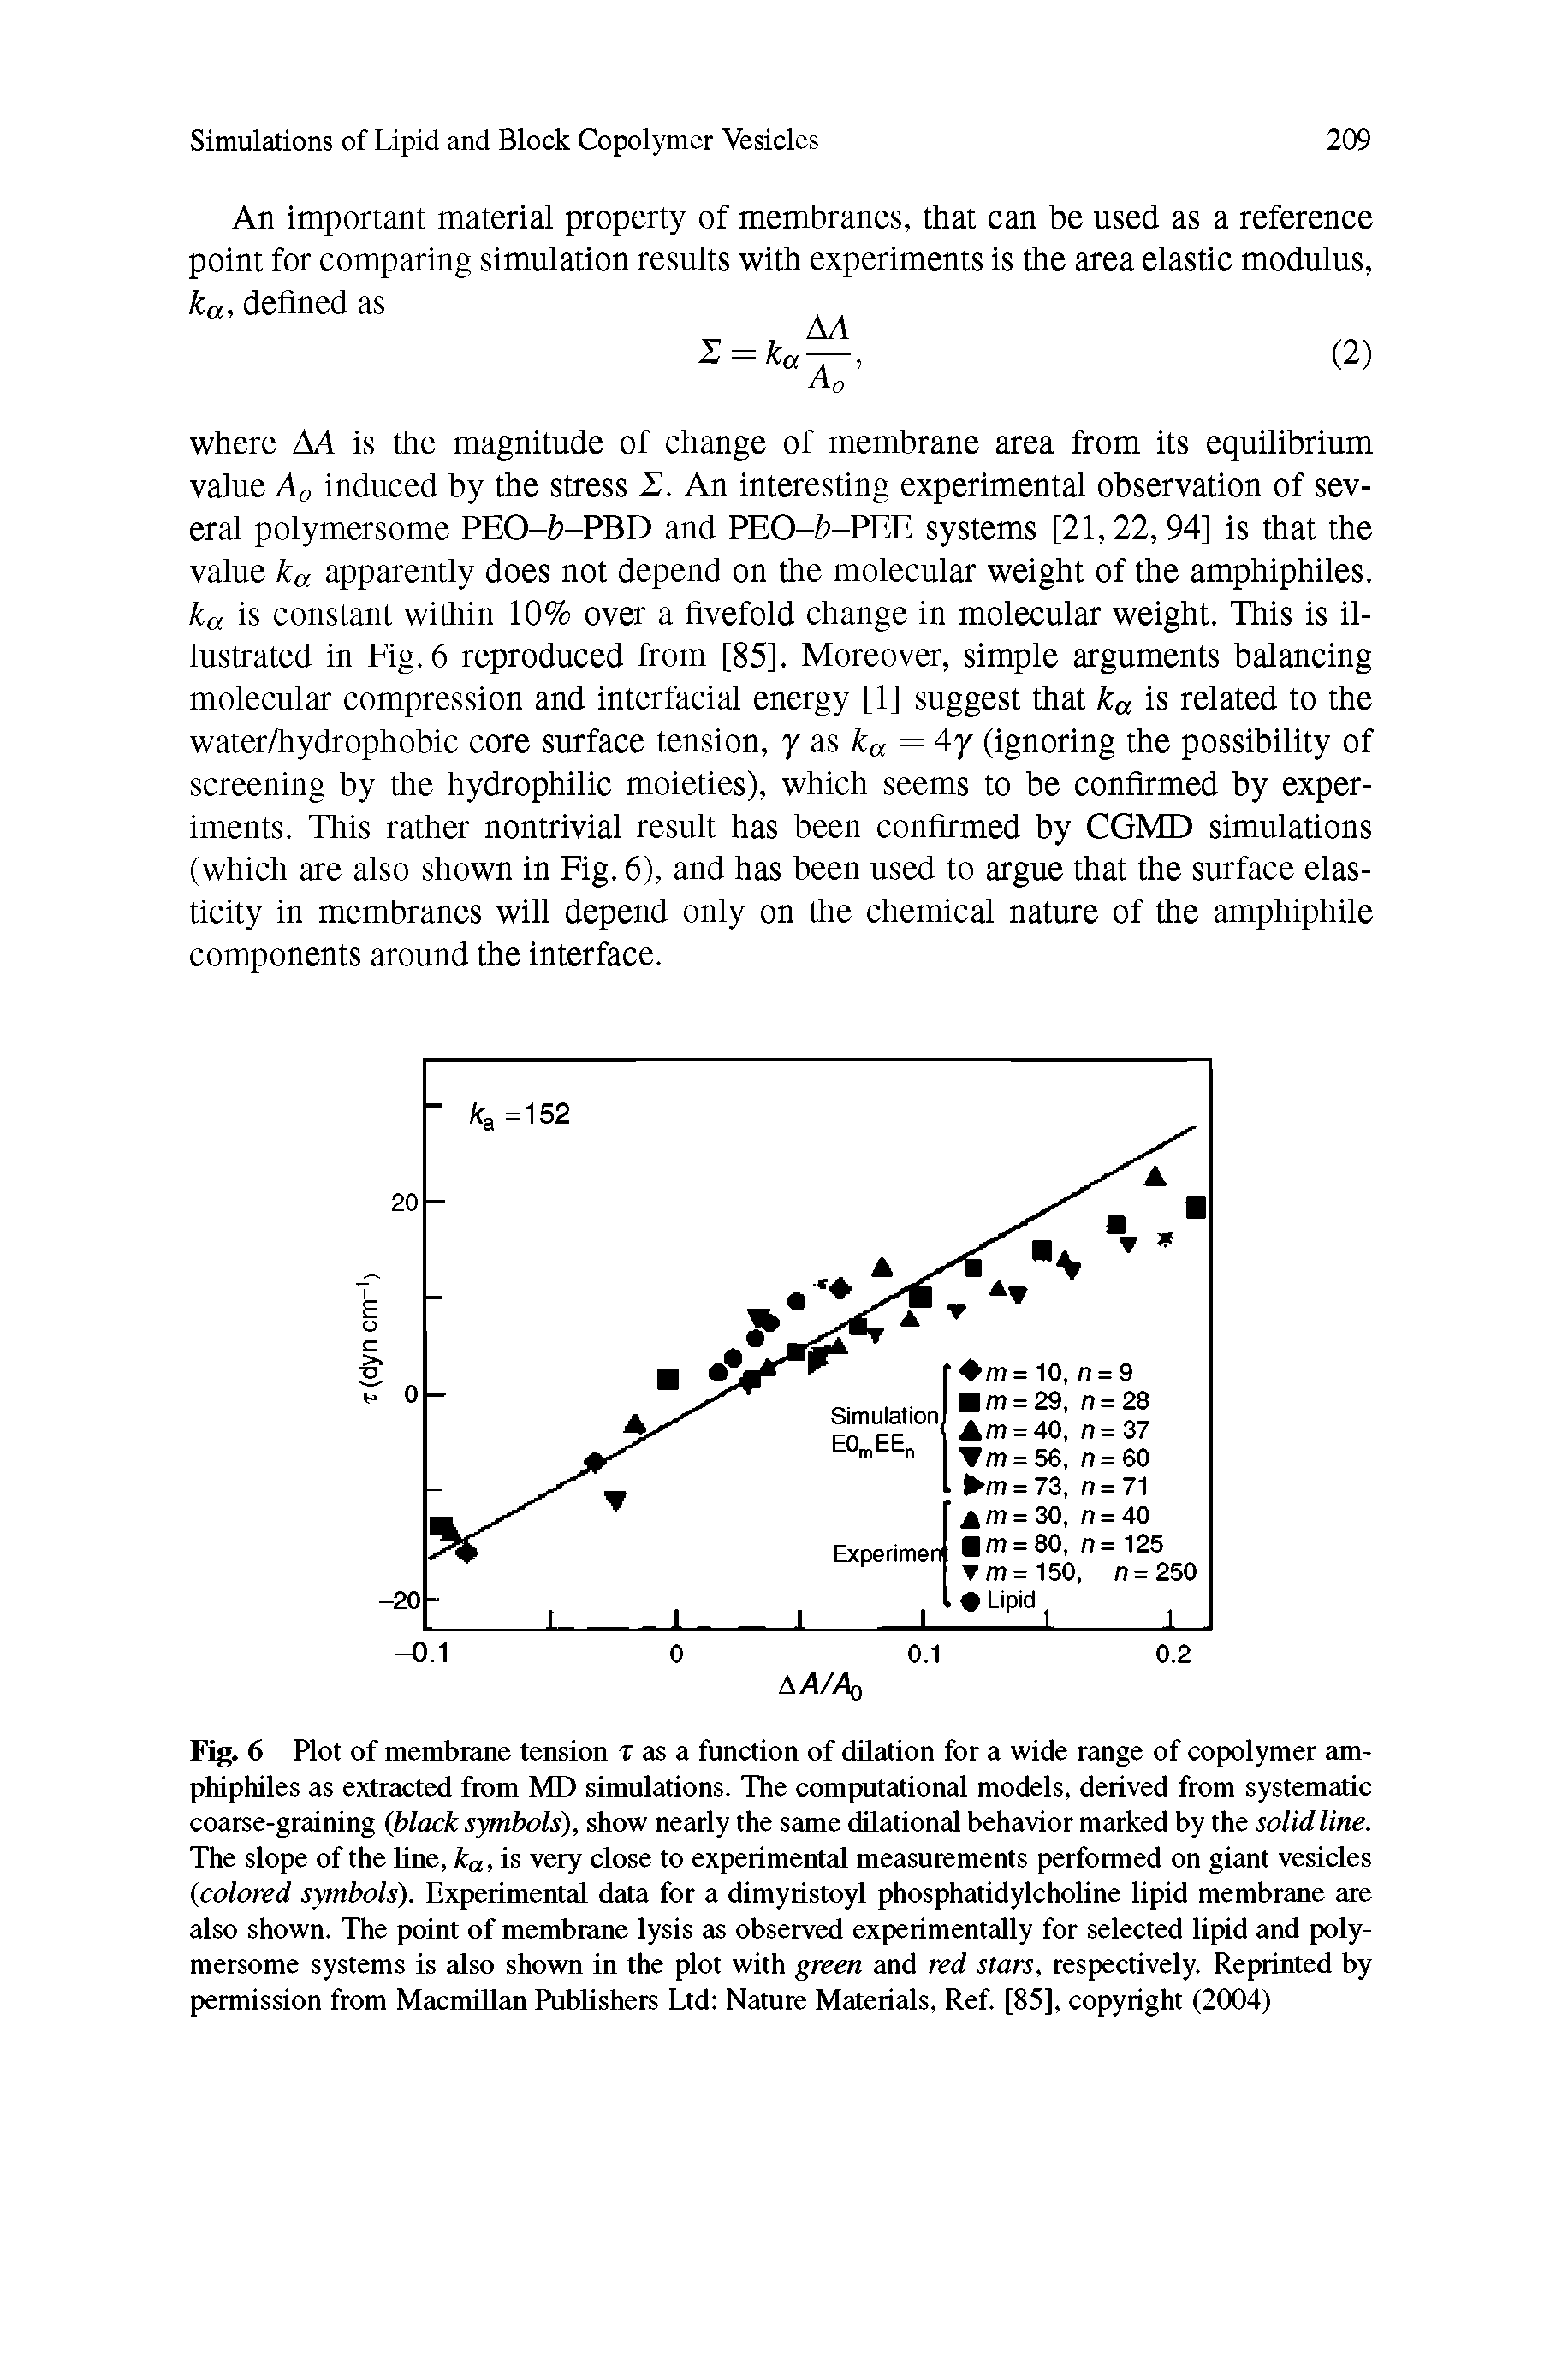 Fig. 6 Plot of membrane tension t as a function of dilation for a wide range of copolymer amphiphiles as extracted from MD simulations. The computational models, derived from systematic coarse-graining (black symbols), show nearly the same dilational behavior marked by the solid line. The slope of the line, ka, is very close to experimental measurements performed on giant vesicles 0colored symbols). Experimental data for a dimyristoyl phosphatidylcholine lipid membrane are also shown. The point of membrane lysis as observed experimentally for selected lipid and polymersome systems is also shown in the plot with green and red stars, respectively. Reprinted by permission from Macmillan Publishers Ltd Nature Materials, Ref. [85], copyright (2004)...